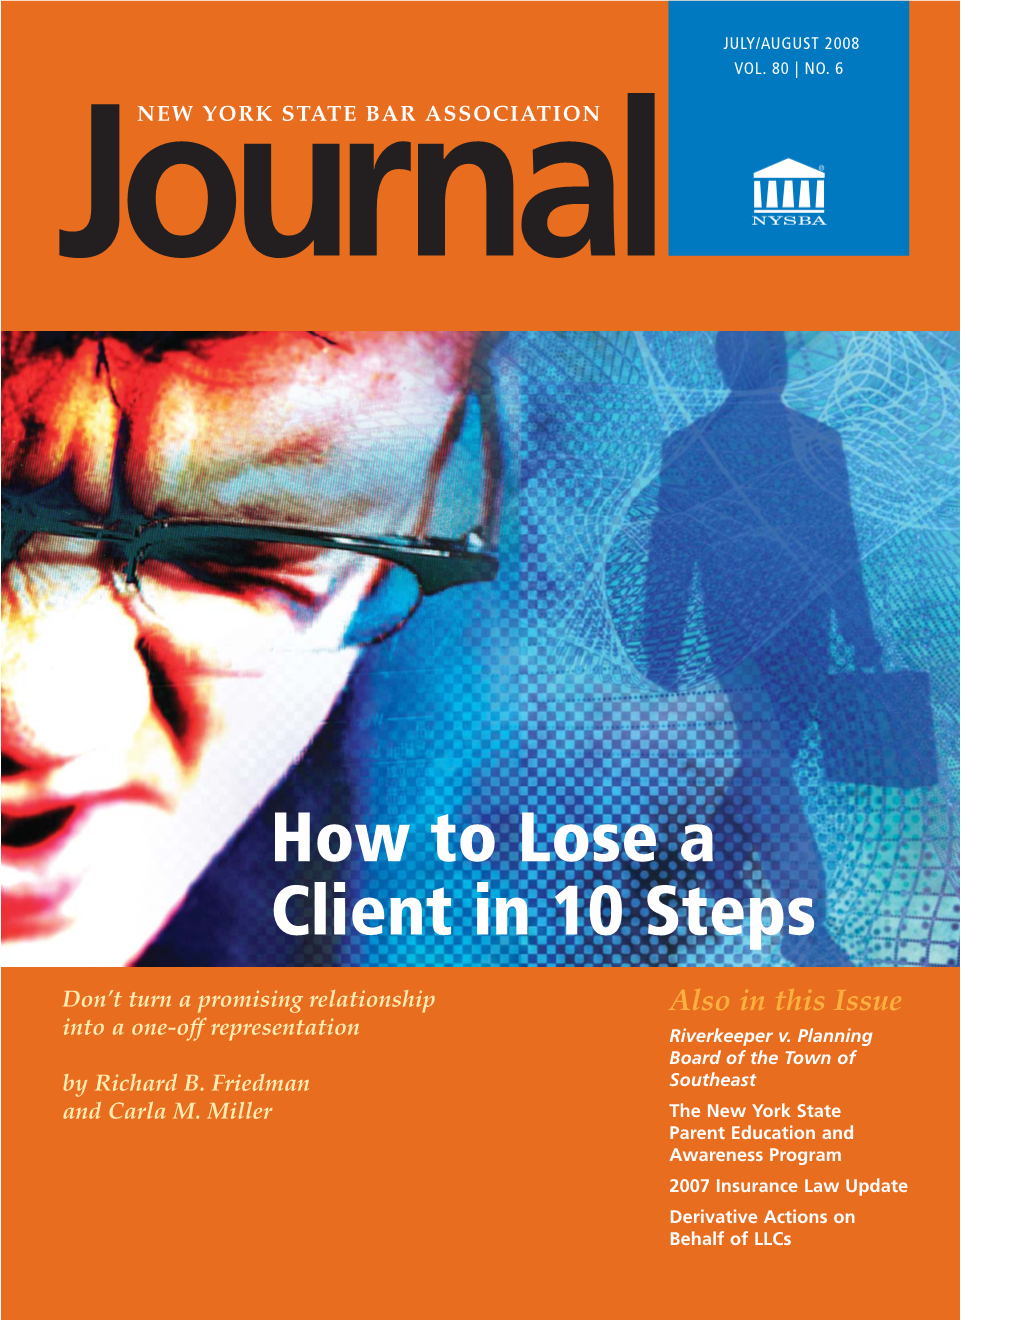 How to Lose a Client in 10 Steps